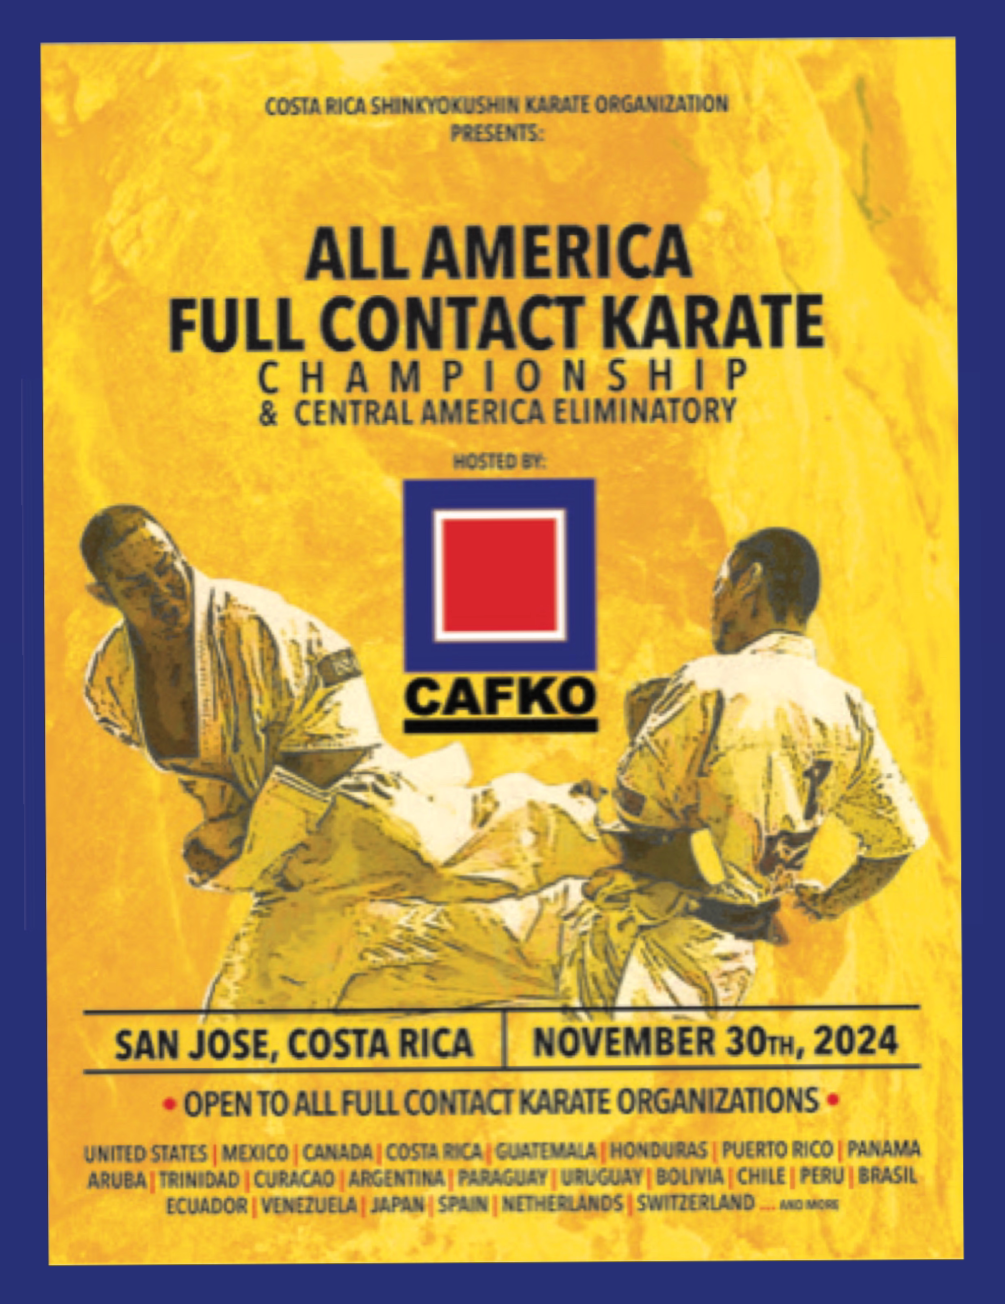 The First All America FullContact Karate Championship 2024